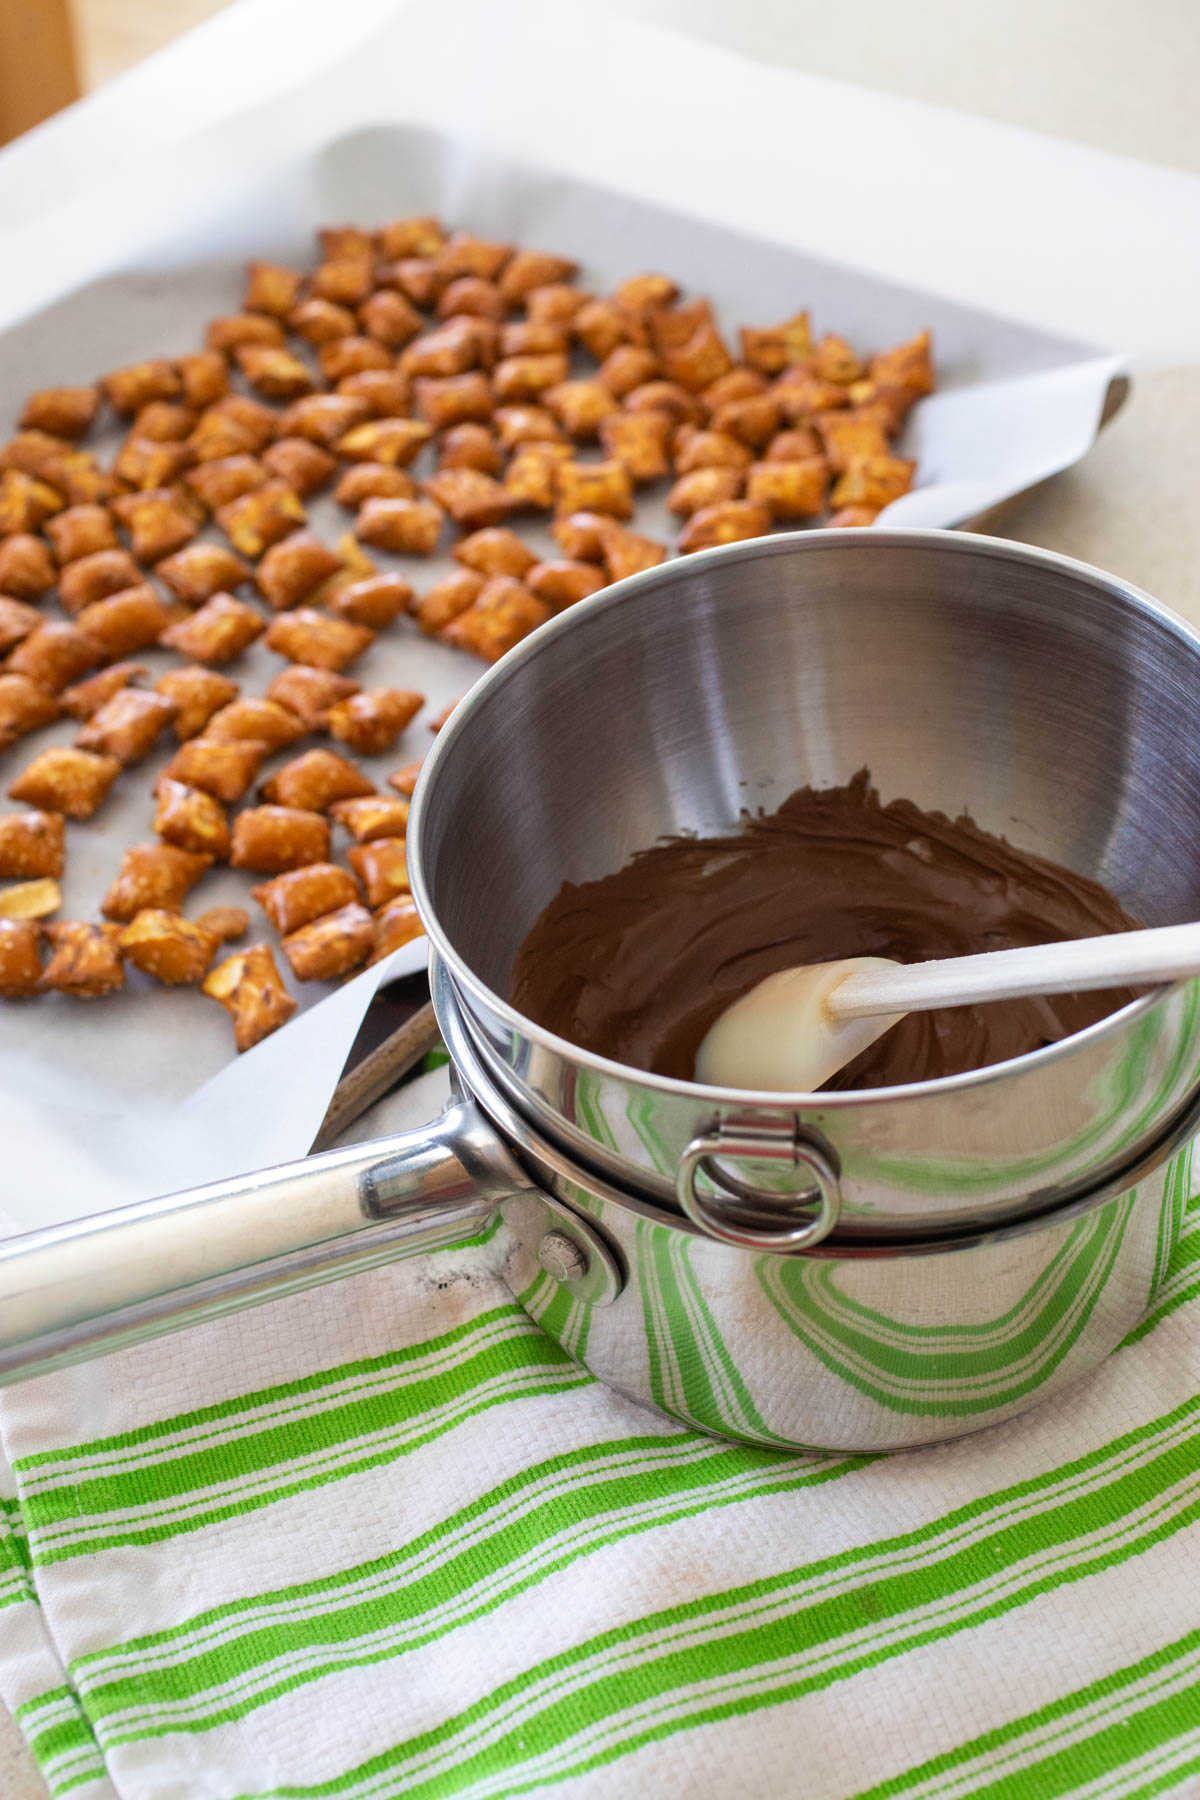 The chocolate chips have been melted in a double boiler made out of a mixing bowl and a sauce pan. The pretzels are ready to be drizzled with chocolate on a baking pan in the background.